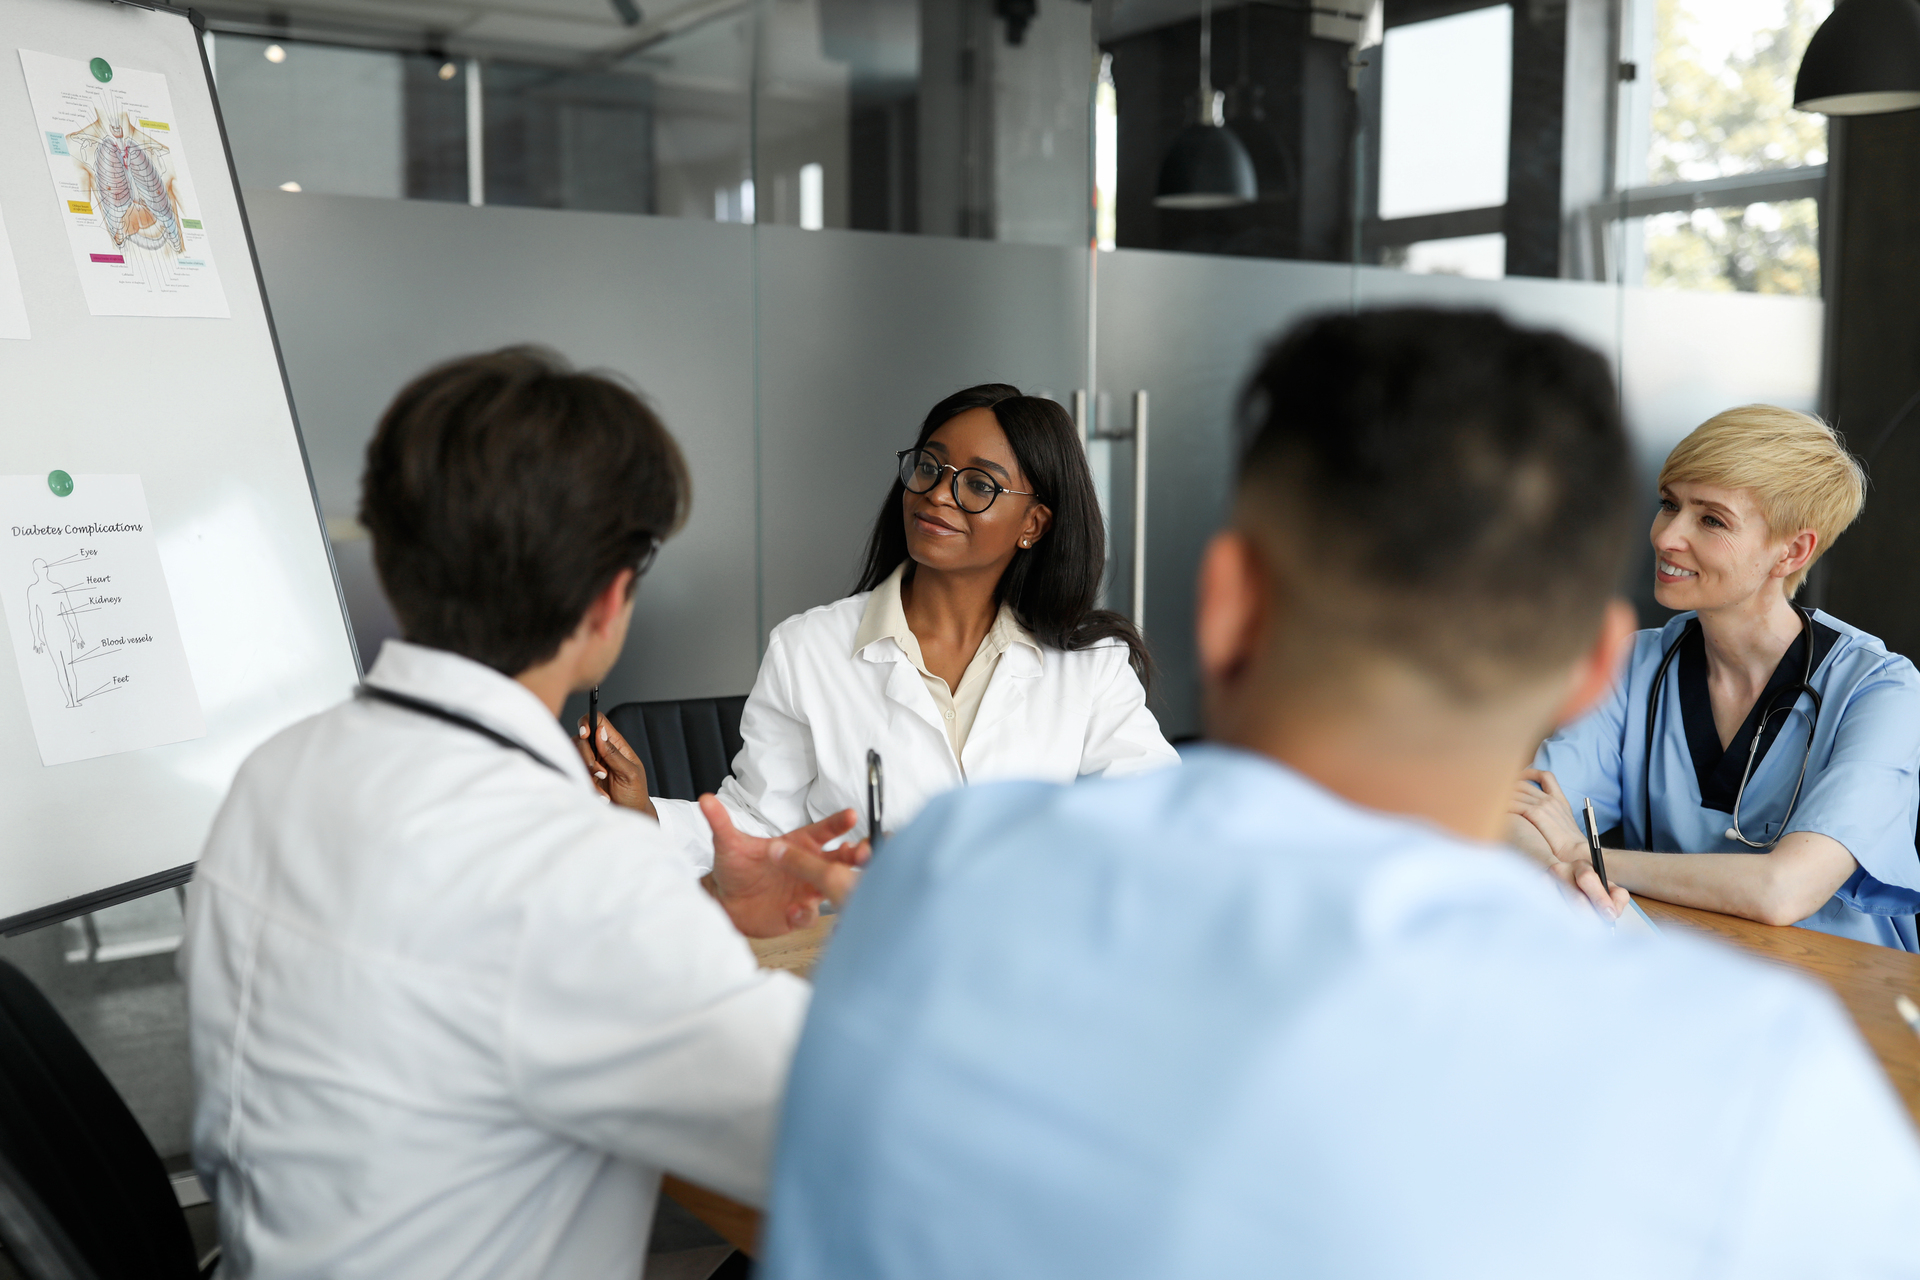 Group of medical professionals in a meeting considering information on a whiteboard